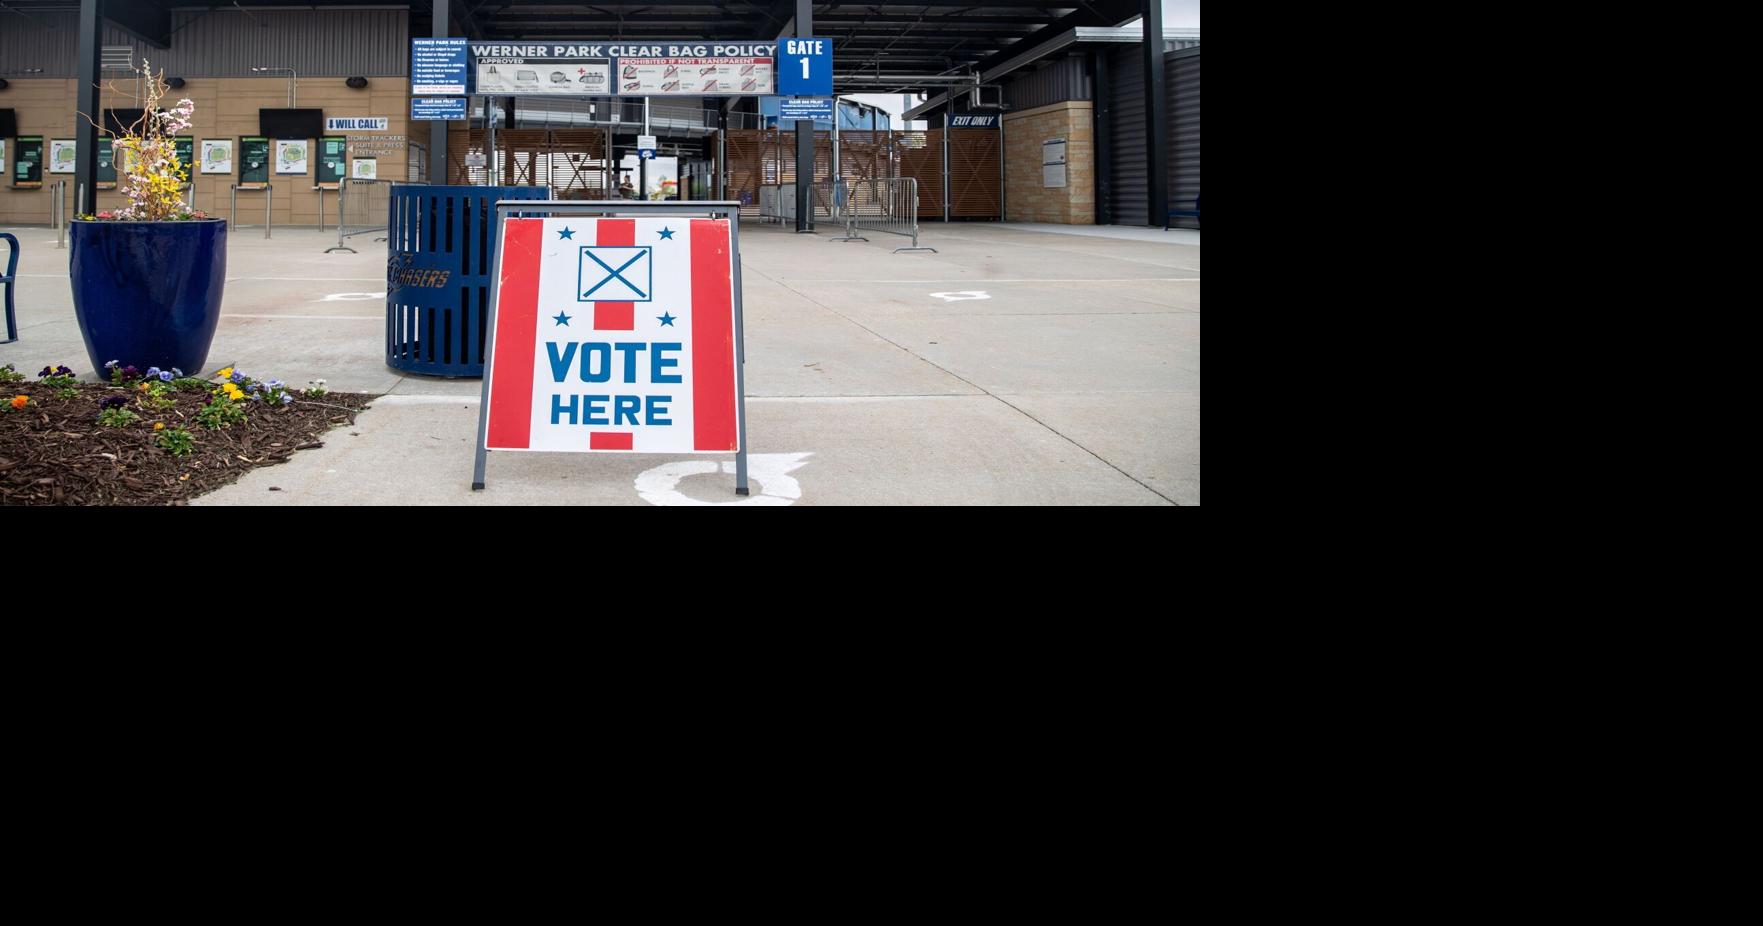 Nebraska voter ID petition circulators alleged to be misrepresenting selves as state workers